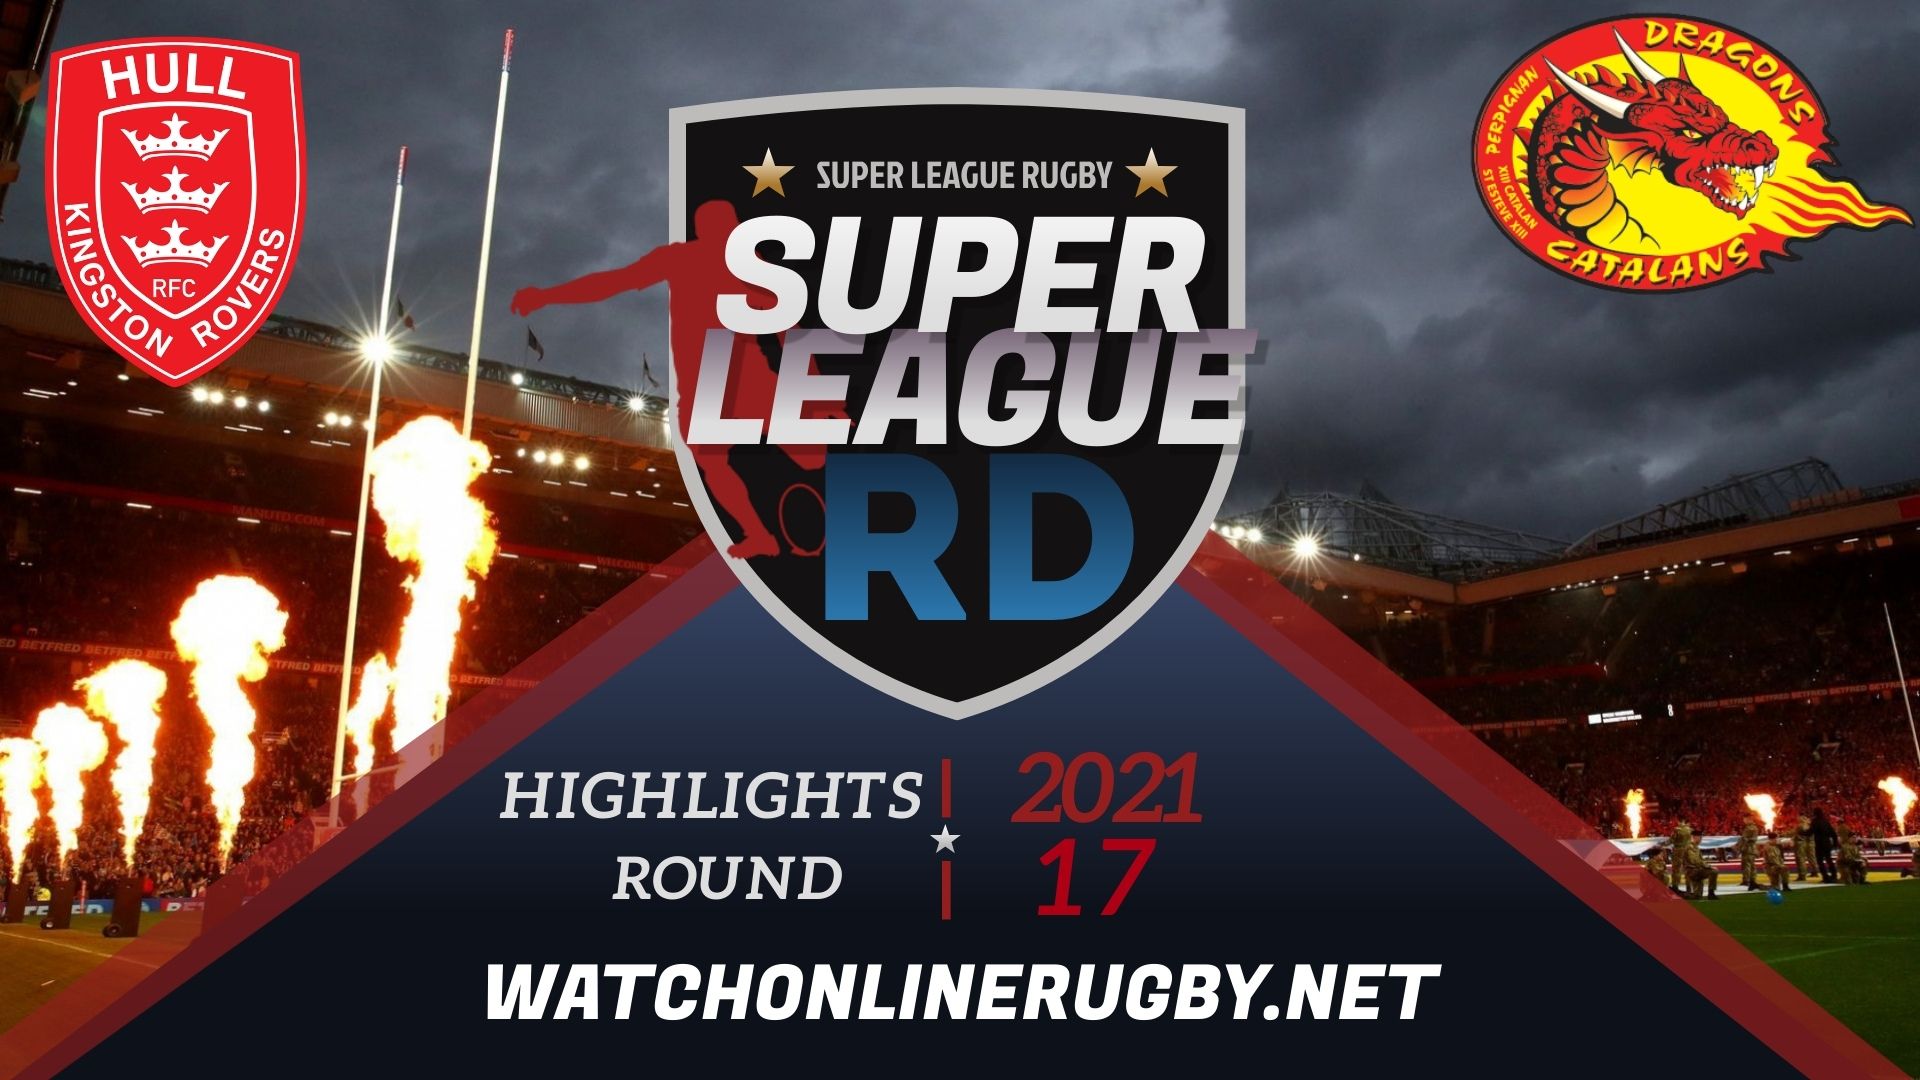 Hull KR Vs Catalans Dragons Super League Rugby 2021 RD 17